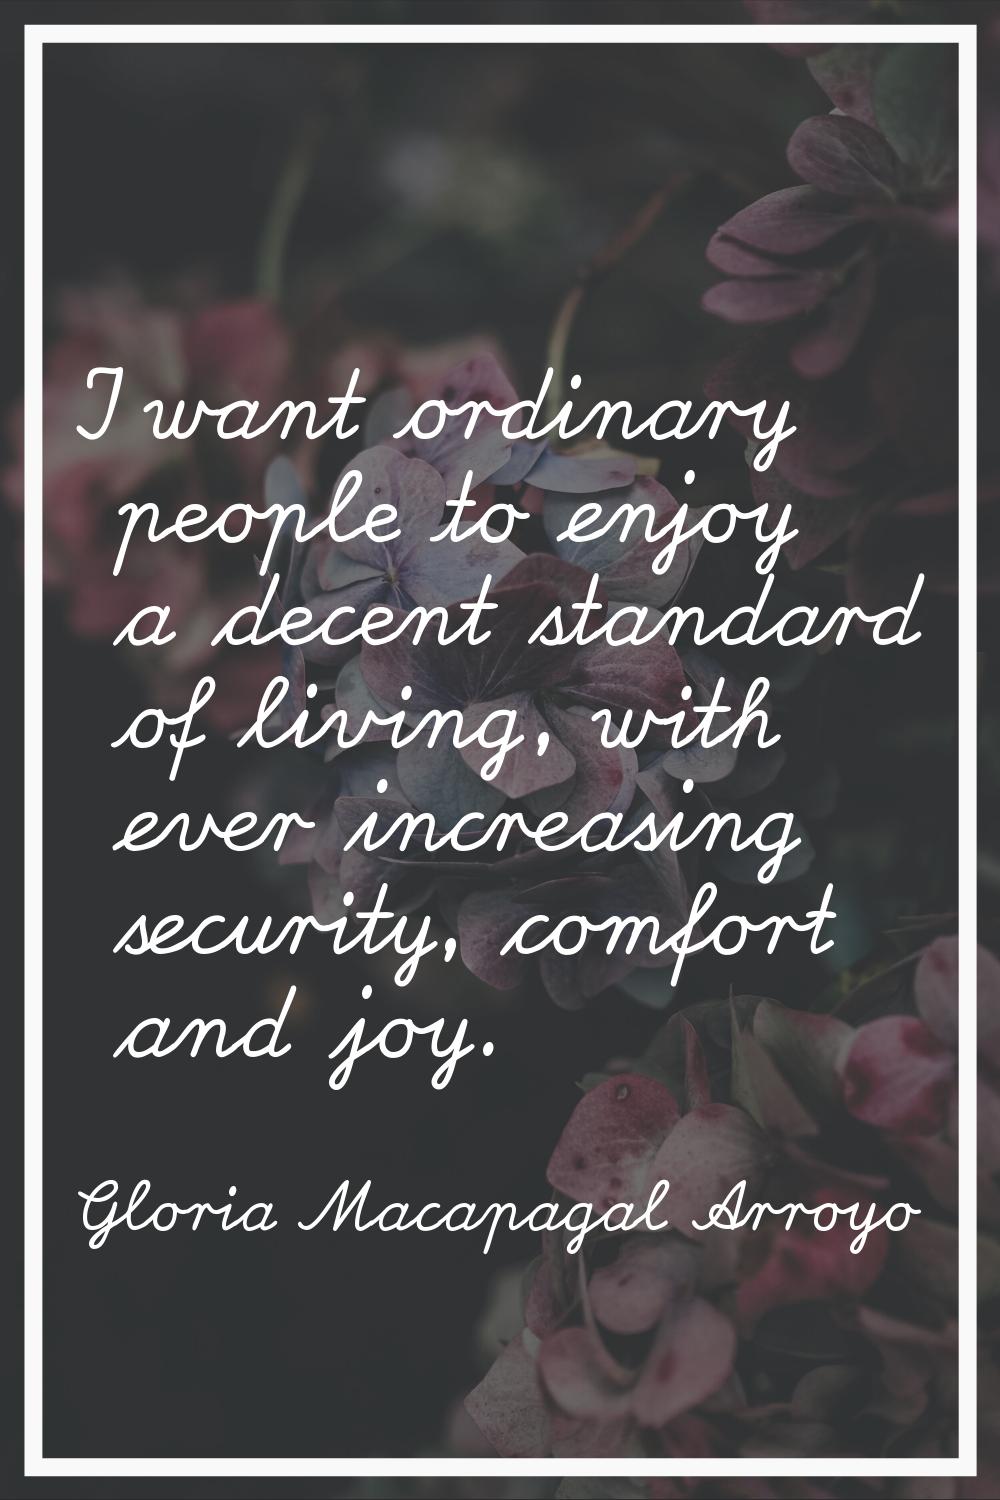 I want ordinary people to enjoy a decent standard of living, with ever increasing security, comfort